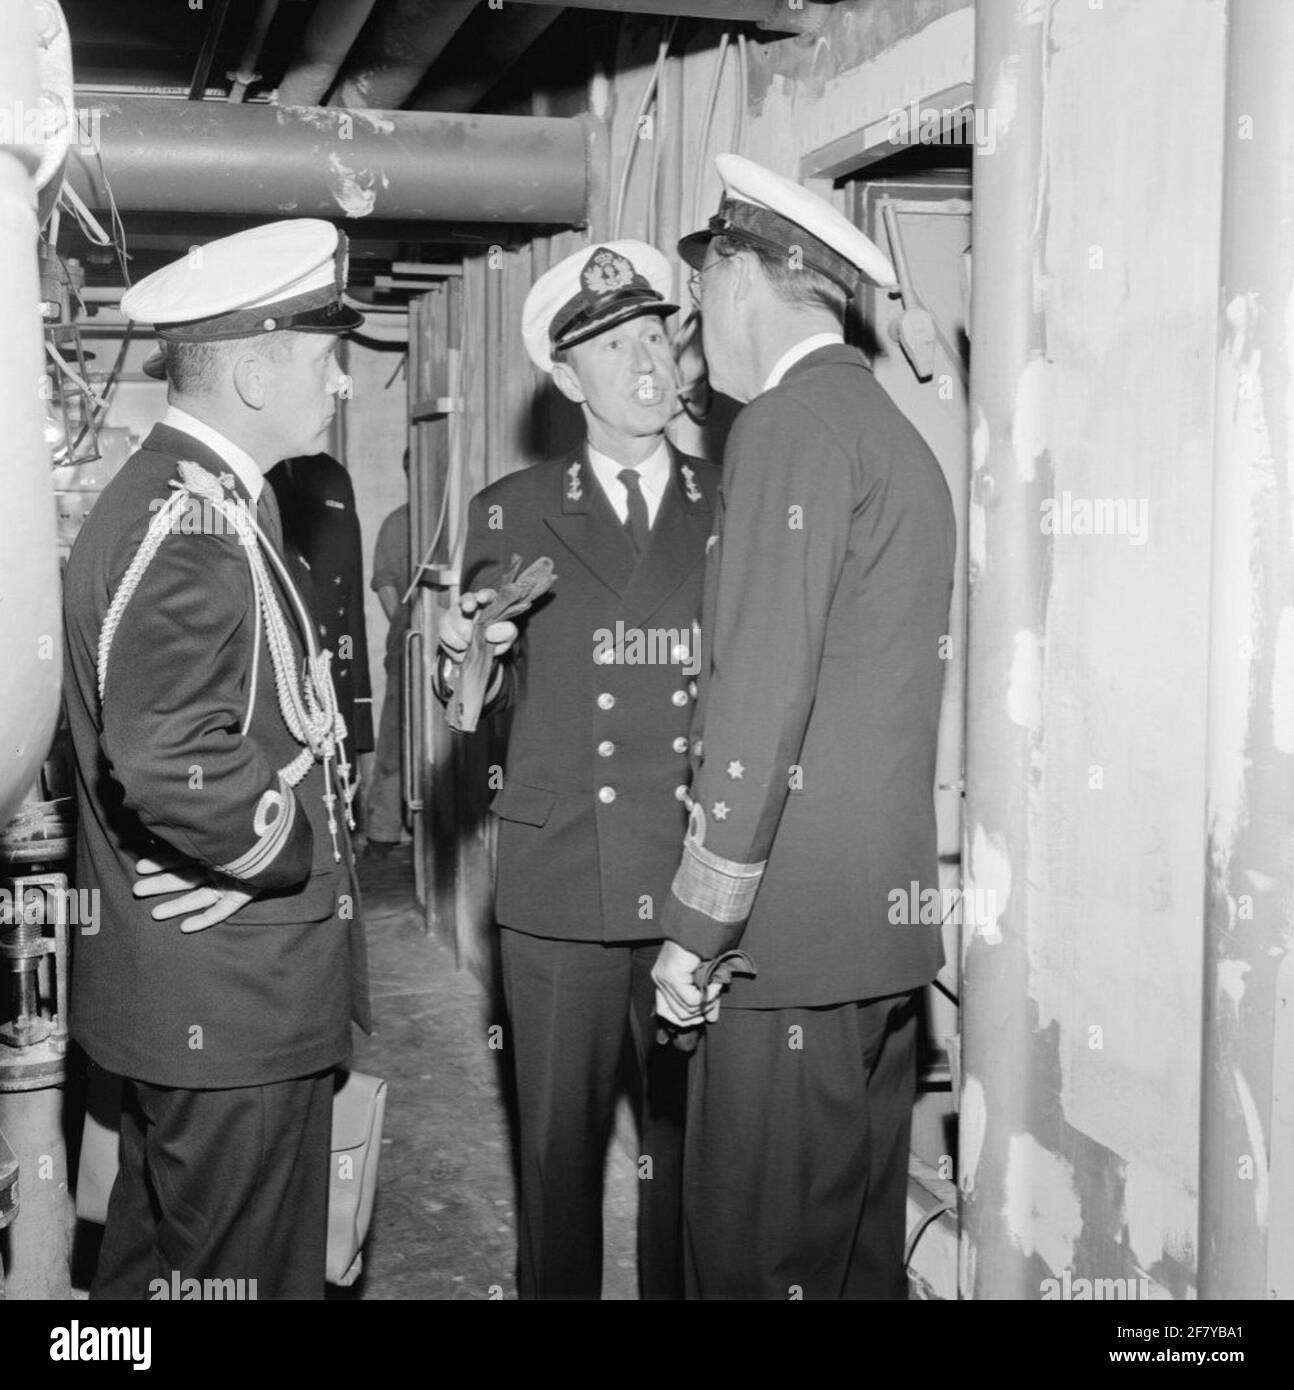 Prince Bernhard, in his position as Inspector General of the Armed Forces (IGK) and in the Uniform of Lieutenant Admiral (LTADM), visit the Rotterdamsche Droogdok Maatschappij (RDM) at the Heijplaat in Rotterdam. The seven provinces (Zipprov) (C 802) and the pool star (A 835), the supply ship for the Royal Netherlands Marine (KM), which after the commissioning as Harer Majesteits (Hr.Ms.) will go into the pool star. On board the pool star, the IGK is in conversation with (probably) the commander of the Poolster, Captain-Ter-Sea (KTZ) W.P. Coolhaas. Stock Photo